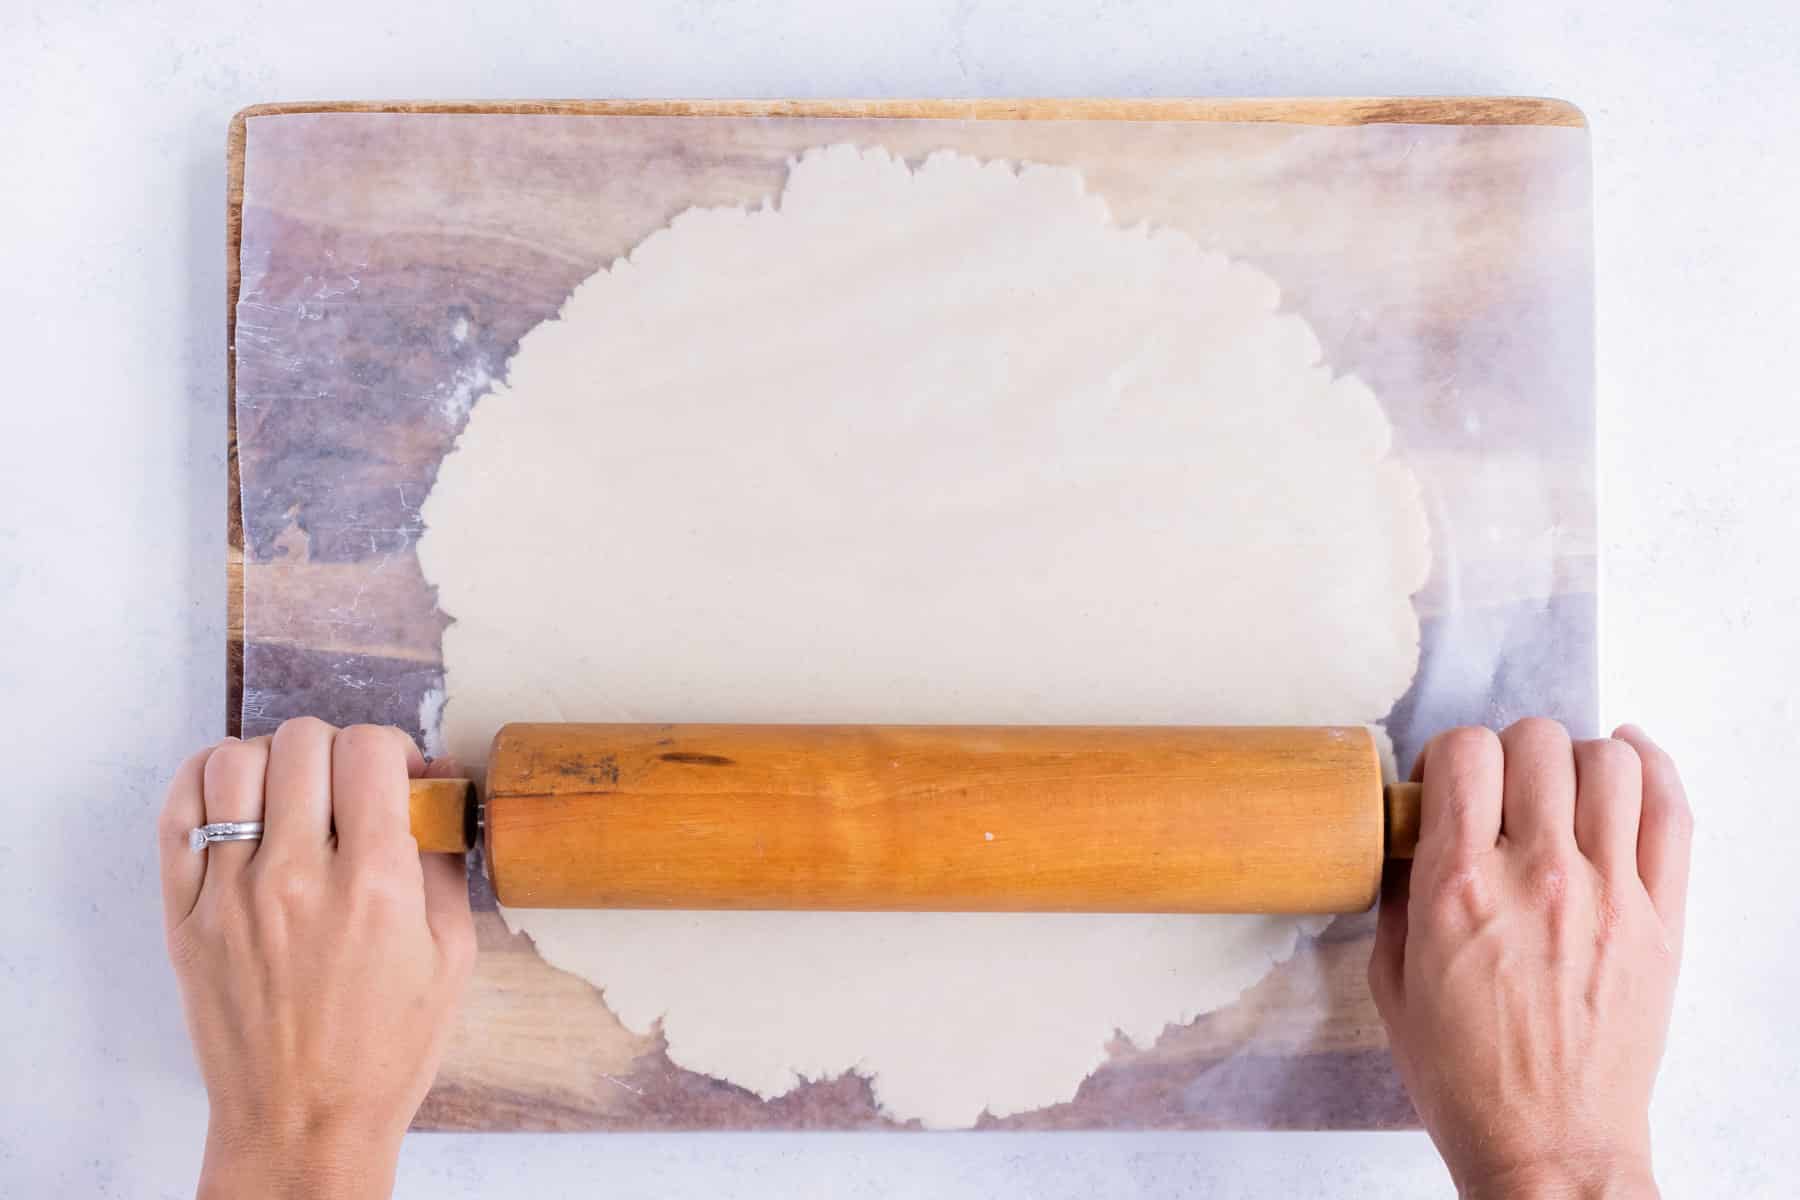 Pie dough is rolled out on a floured surface.